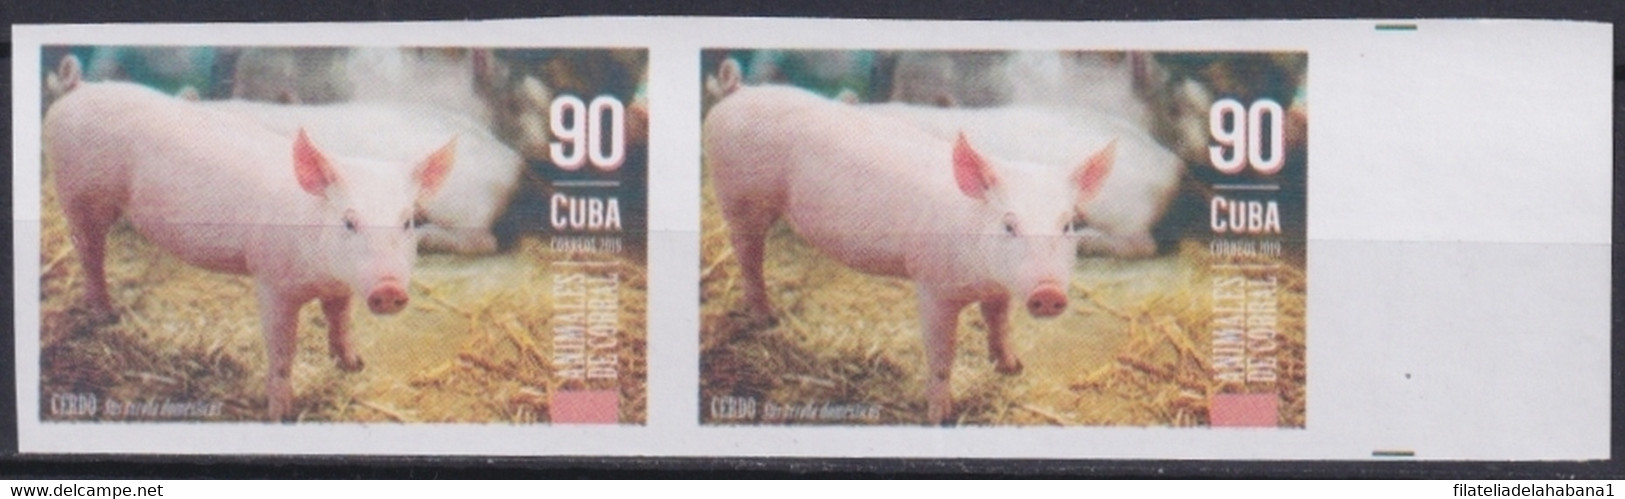 2019.191 CUBA MNH 2019 IMPERFORATED PROOF 90c ANIMALES DE CORRAL CERDOS PIG. - Imperforates, Proofs & Errors